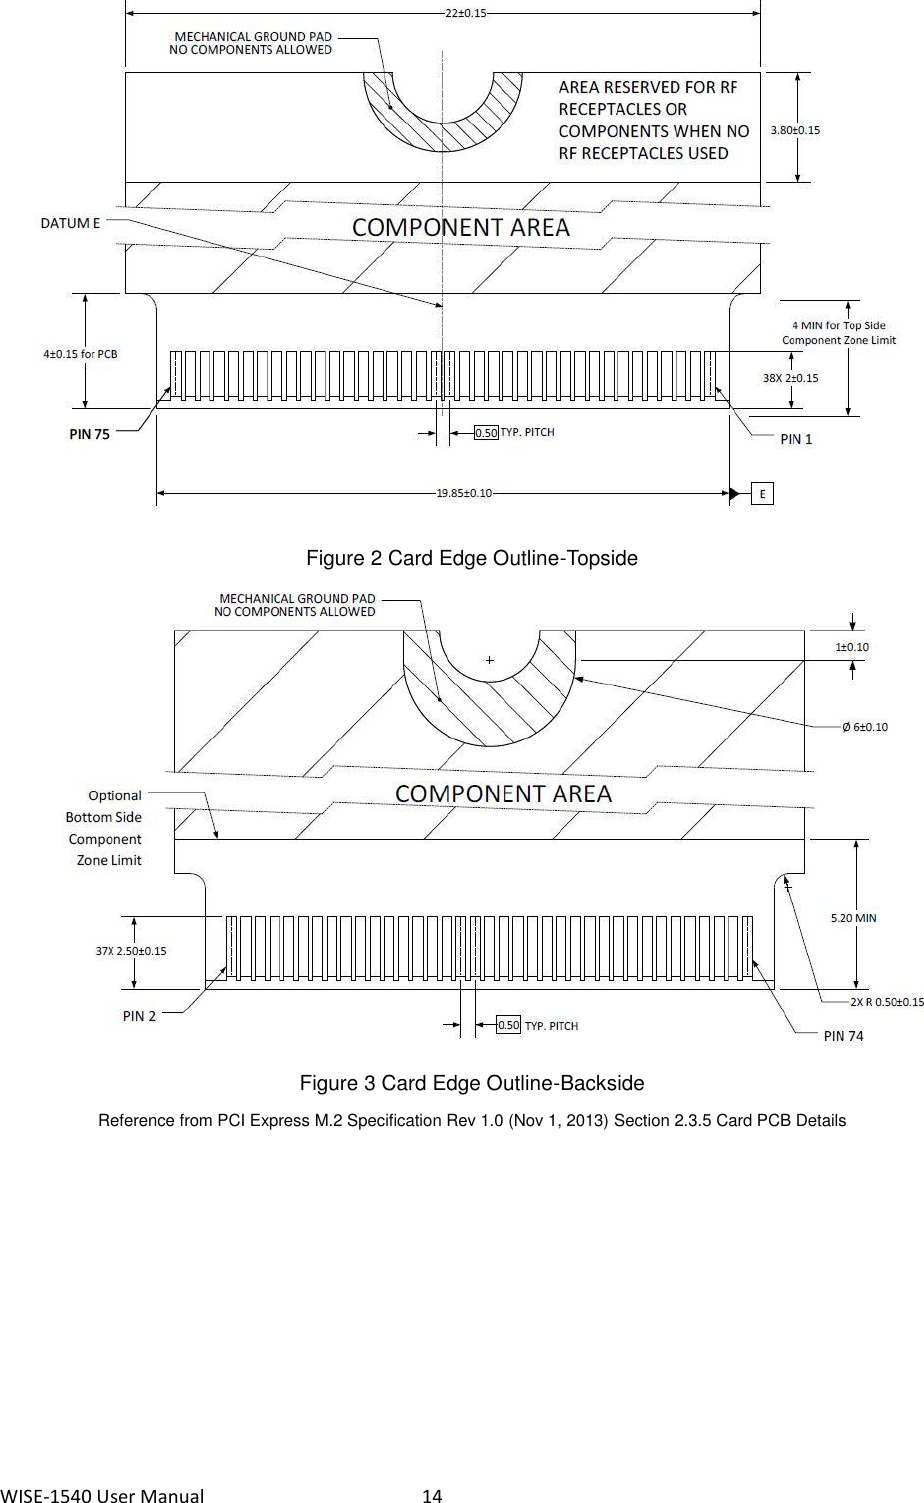 WISE-1540 User Manual  14  Figure 2 Card Edge Outline-Topside  Figure 3 Card Edge Outline-Backside Reference from PCI Express M.2 Specification Rev 1.0 (Nov 1, 2013) Section 2.3.5 Card PCB Details    